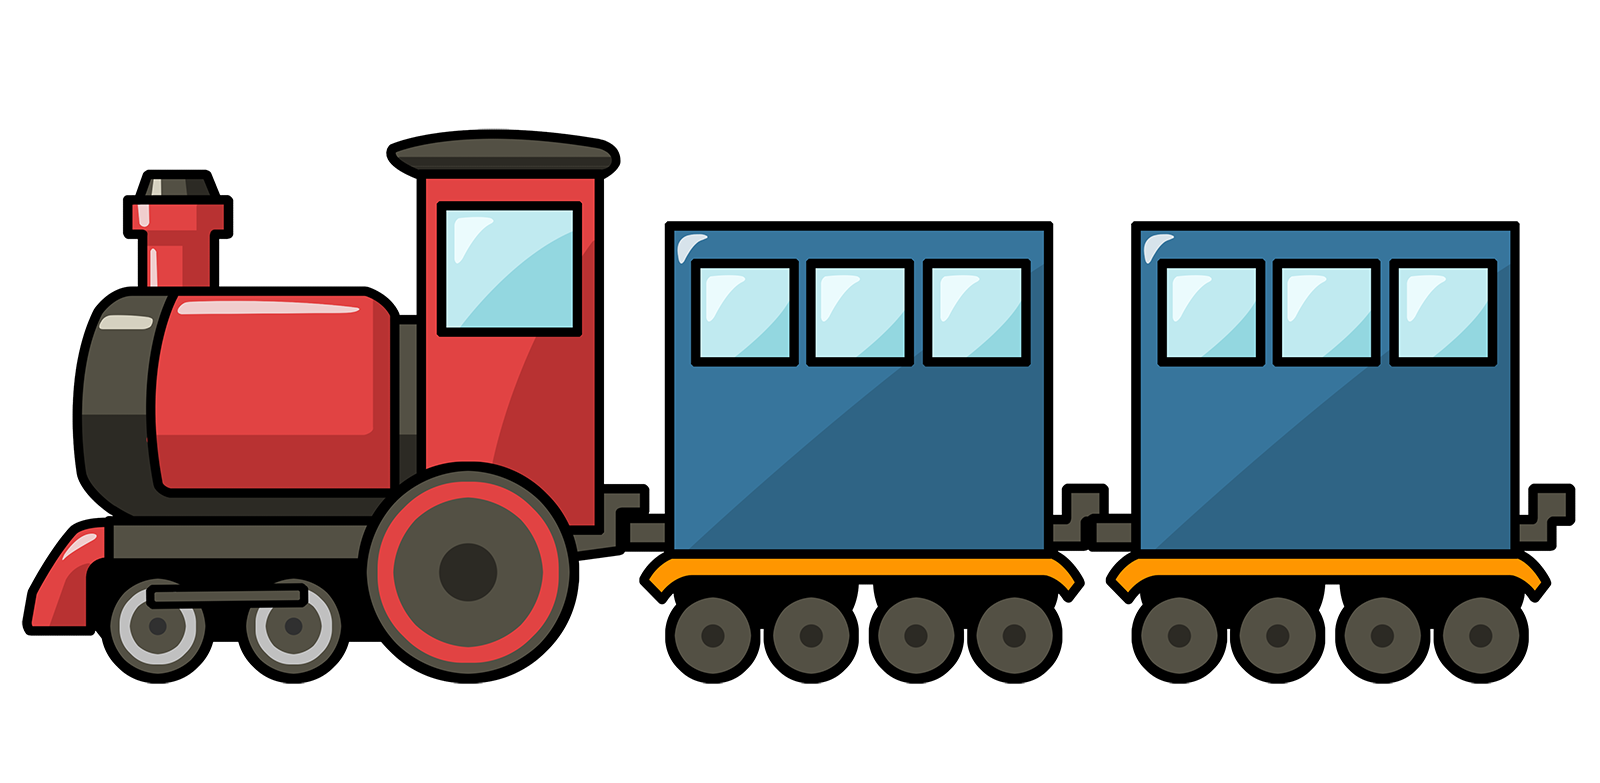 Toy trains clipart free clipa